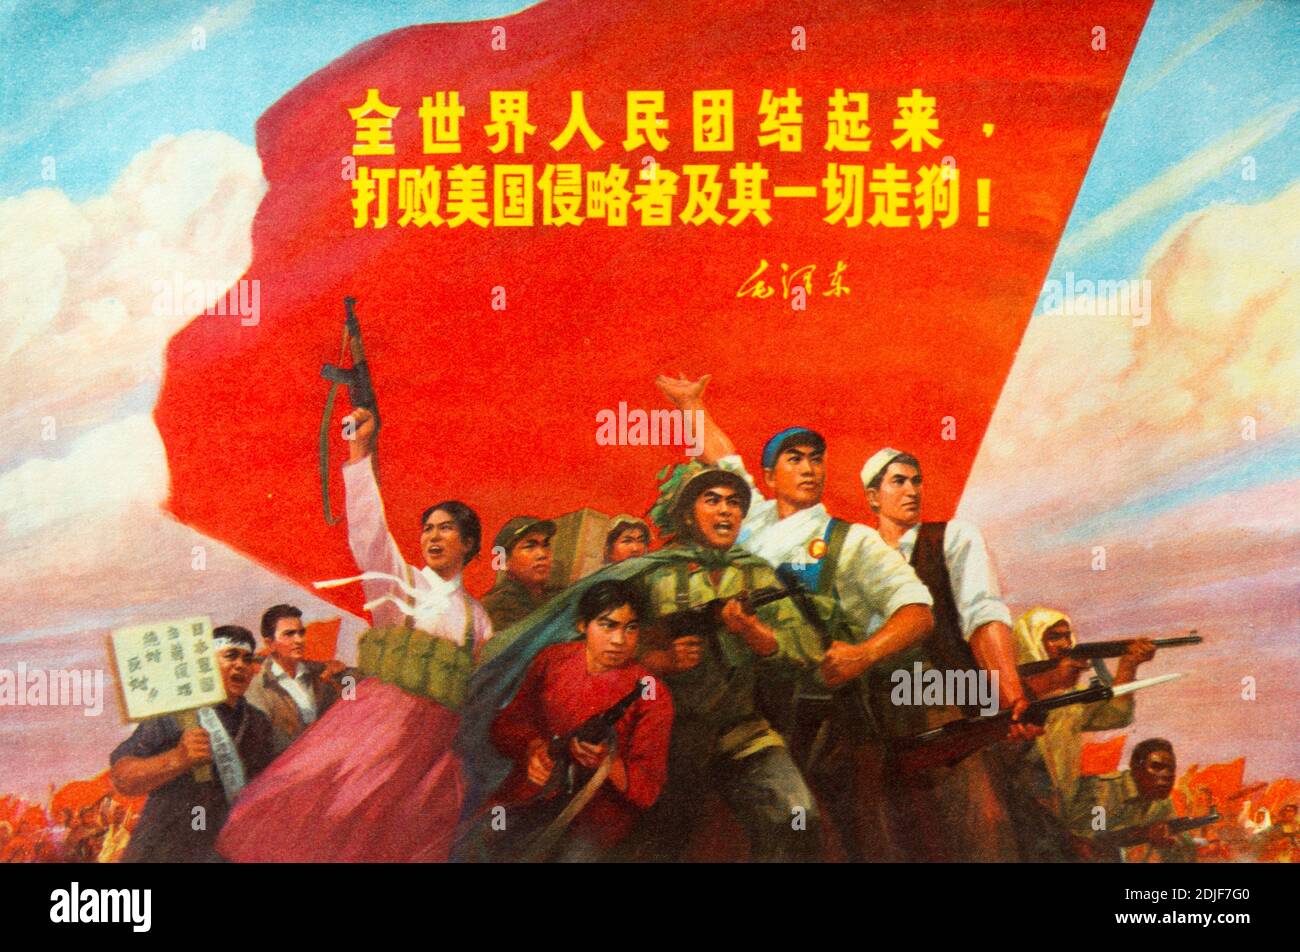 A genuine propaganda poster during the Cultural Revolution in China. Stock Photo